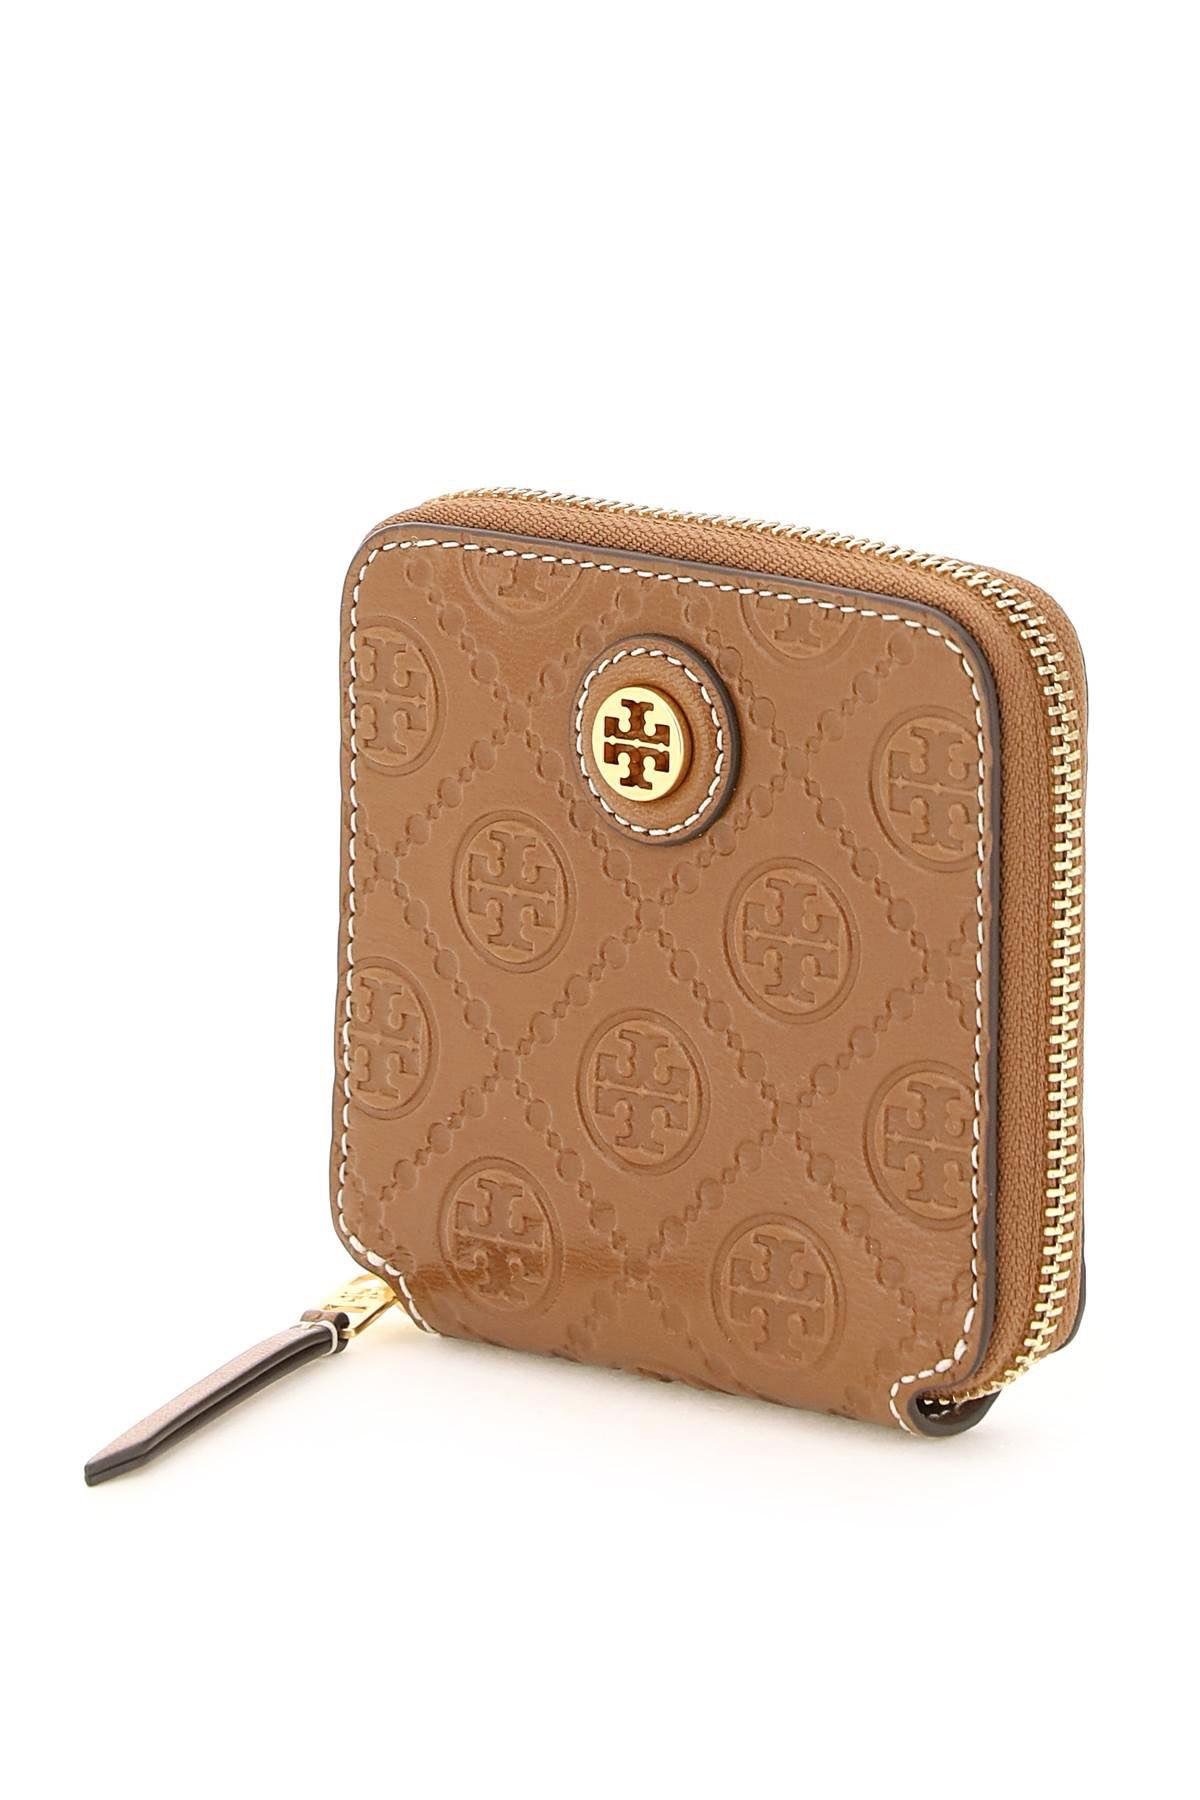 Tory Burch T Monogram Leather Bifold Wallet in Green | Lyst Canada